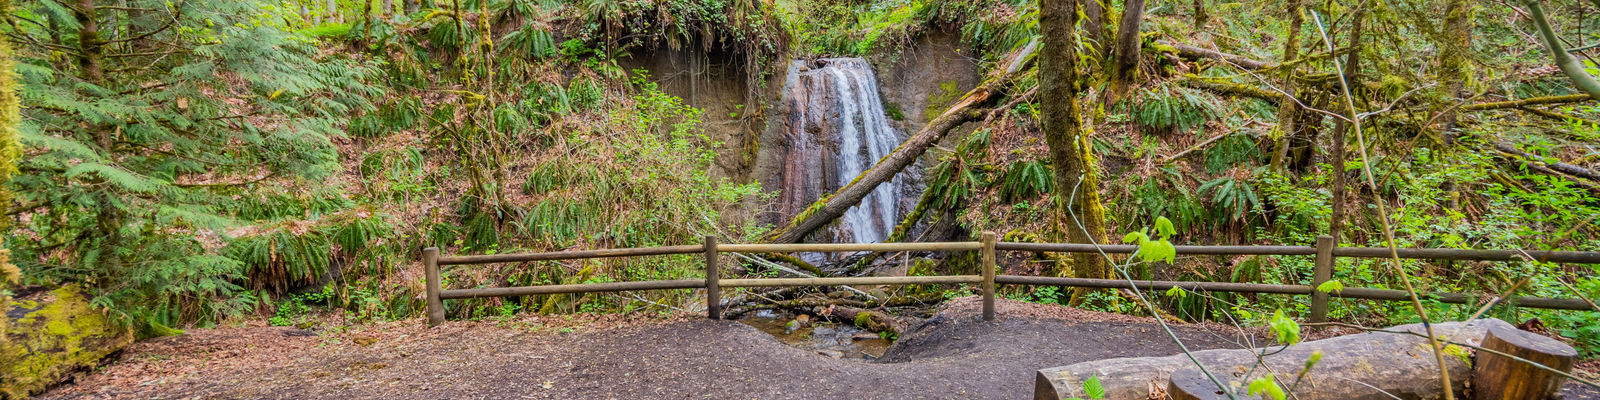 landscape photo of park with waterfall in center